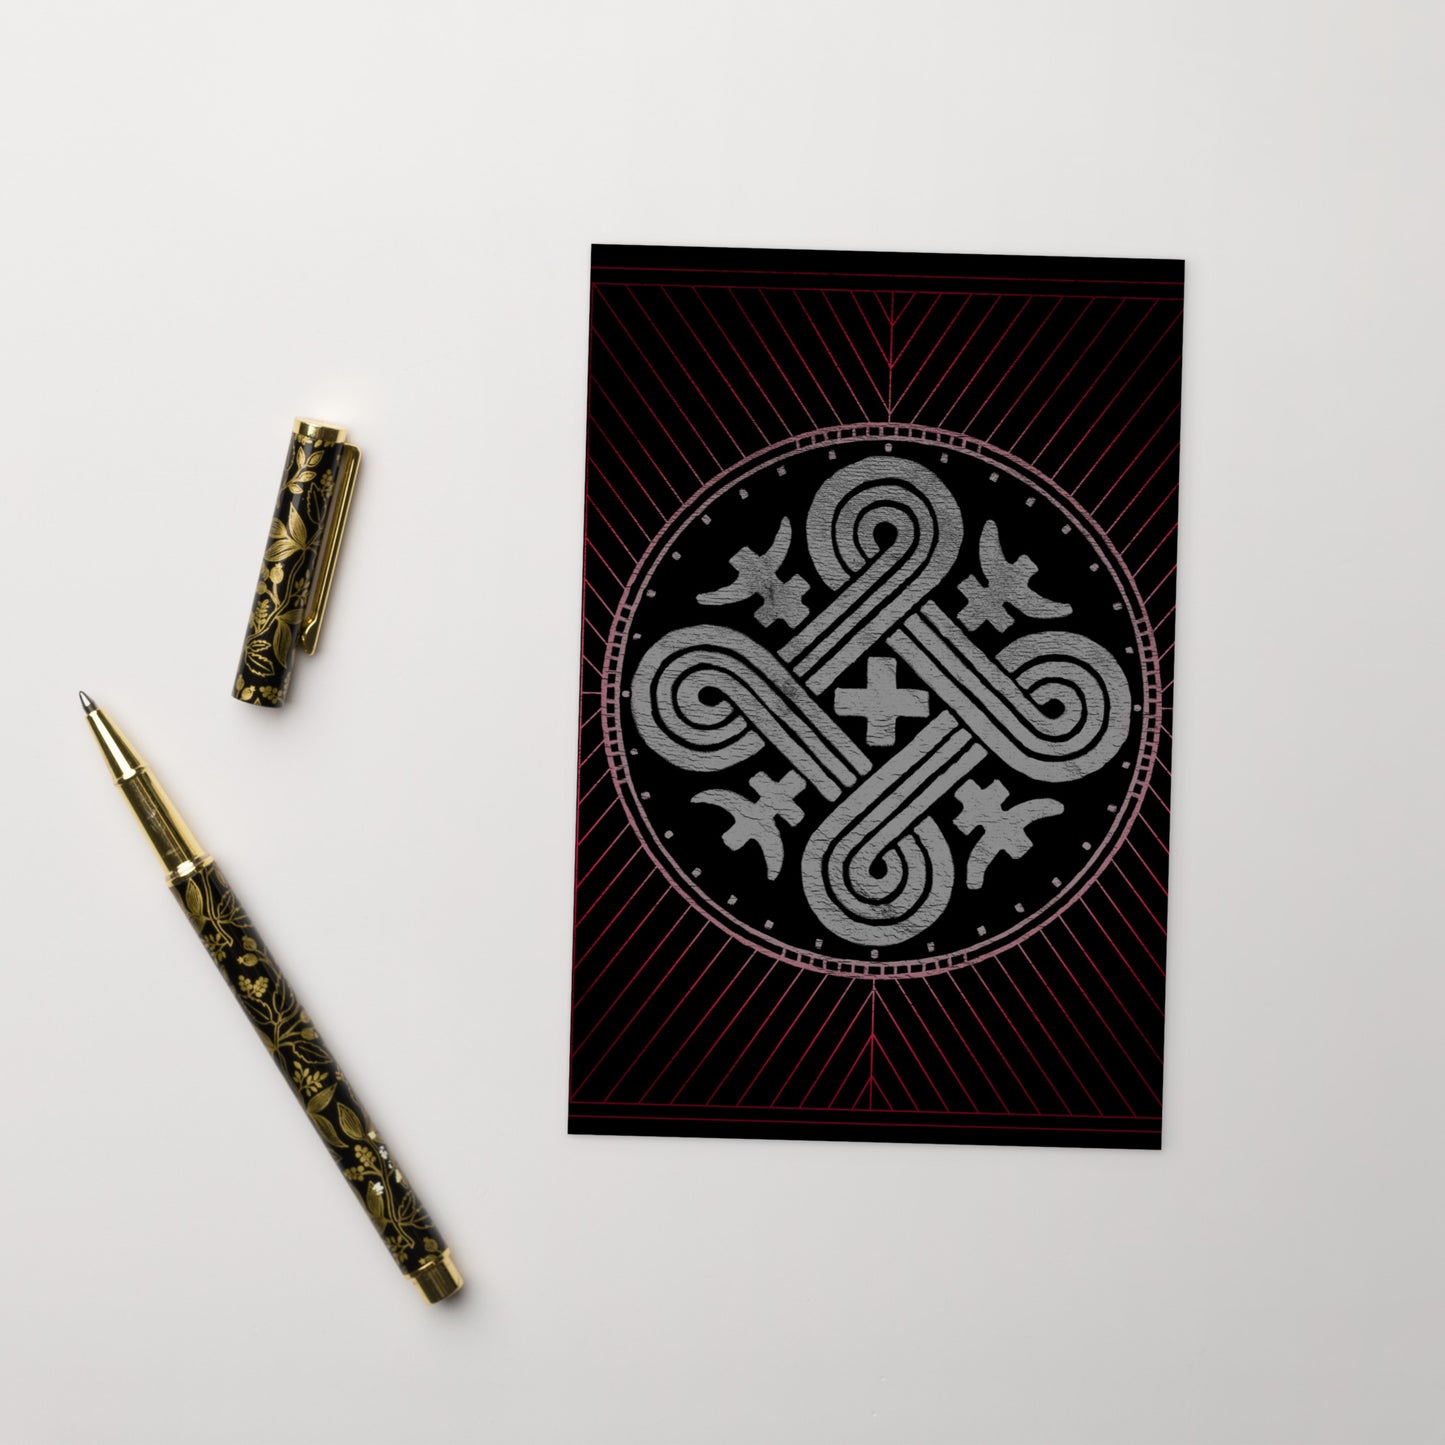 The Looped Square / Art Postcard